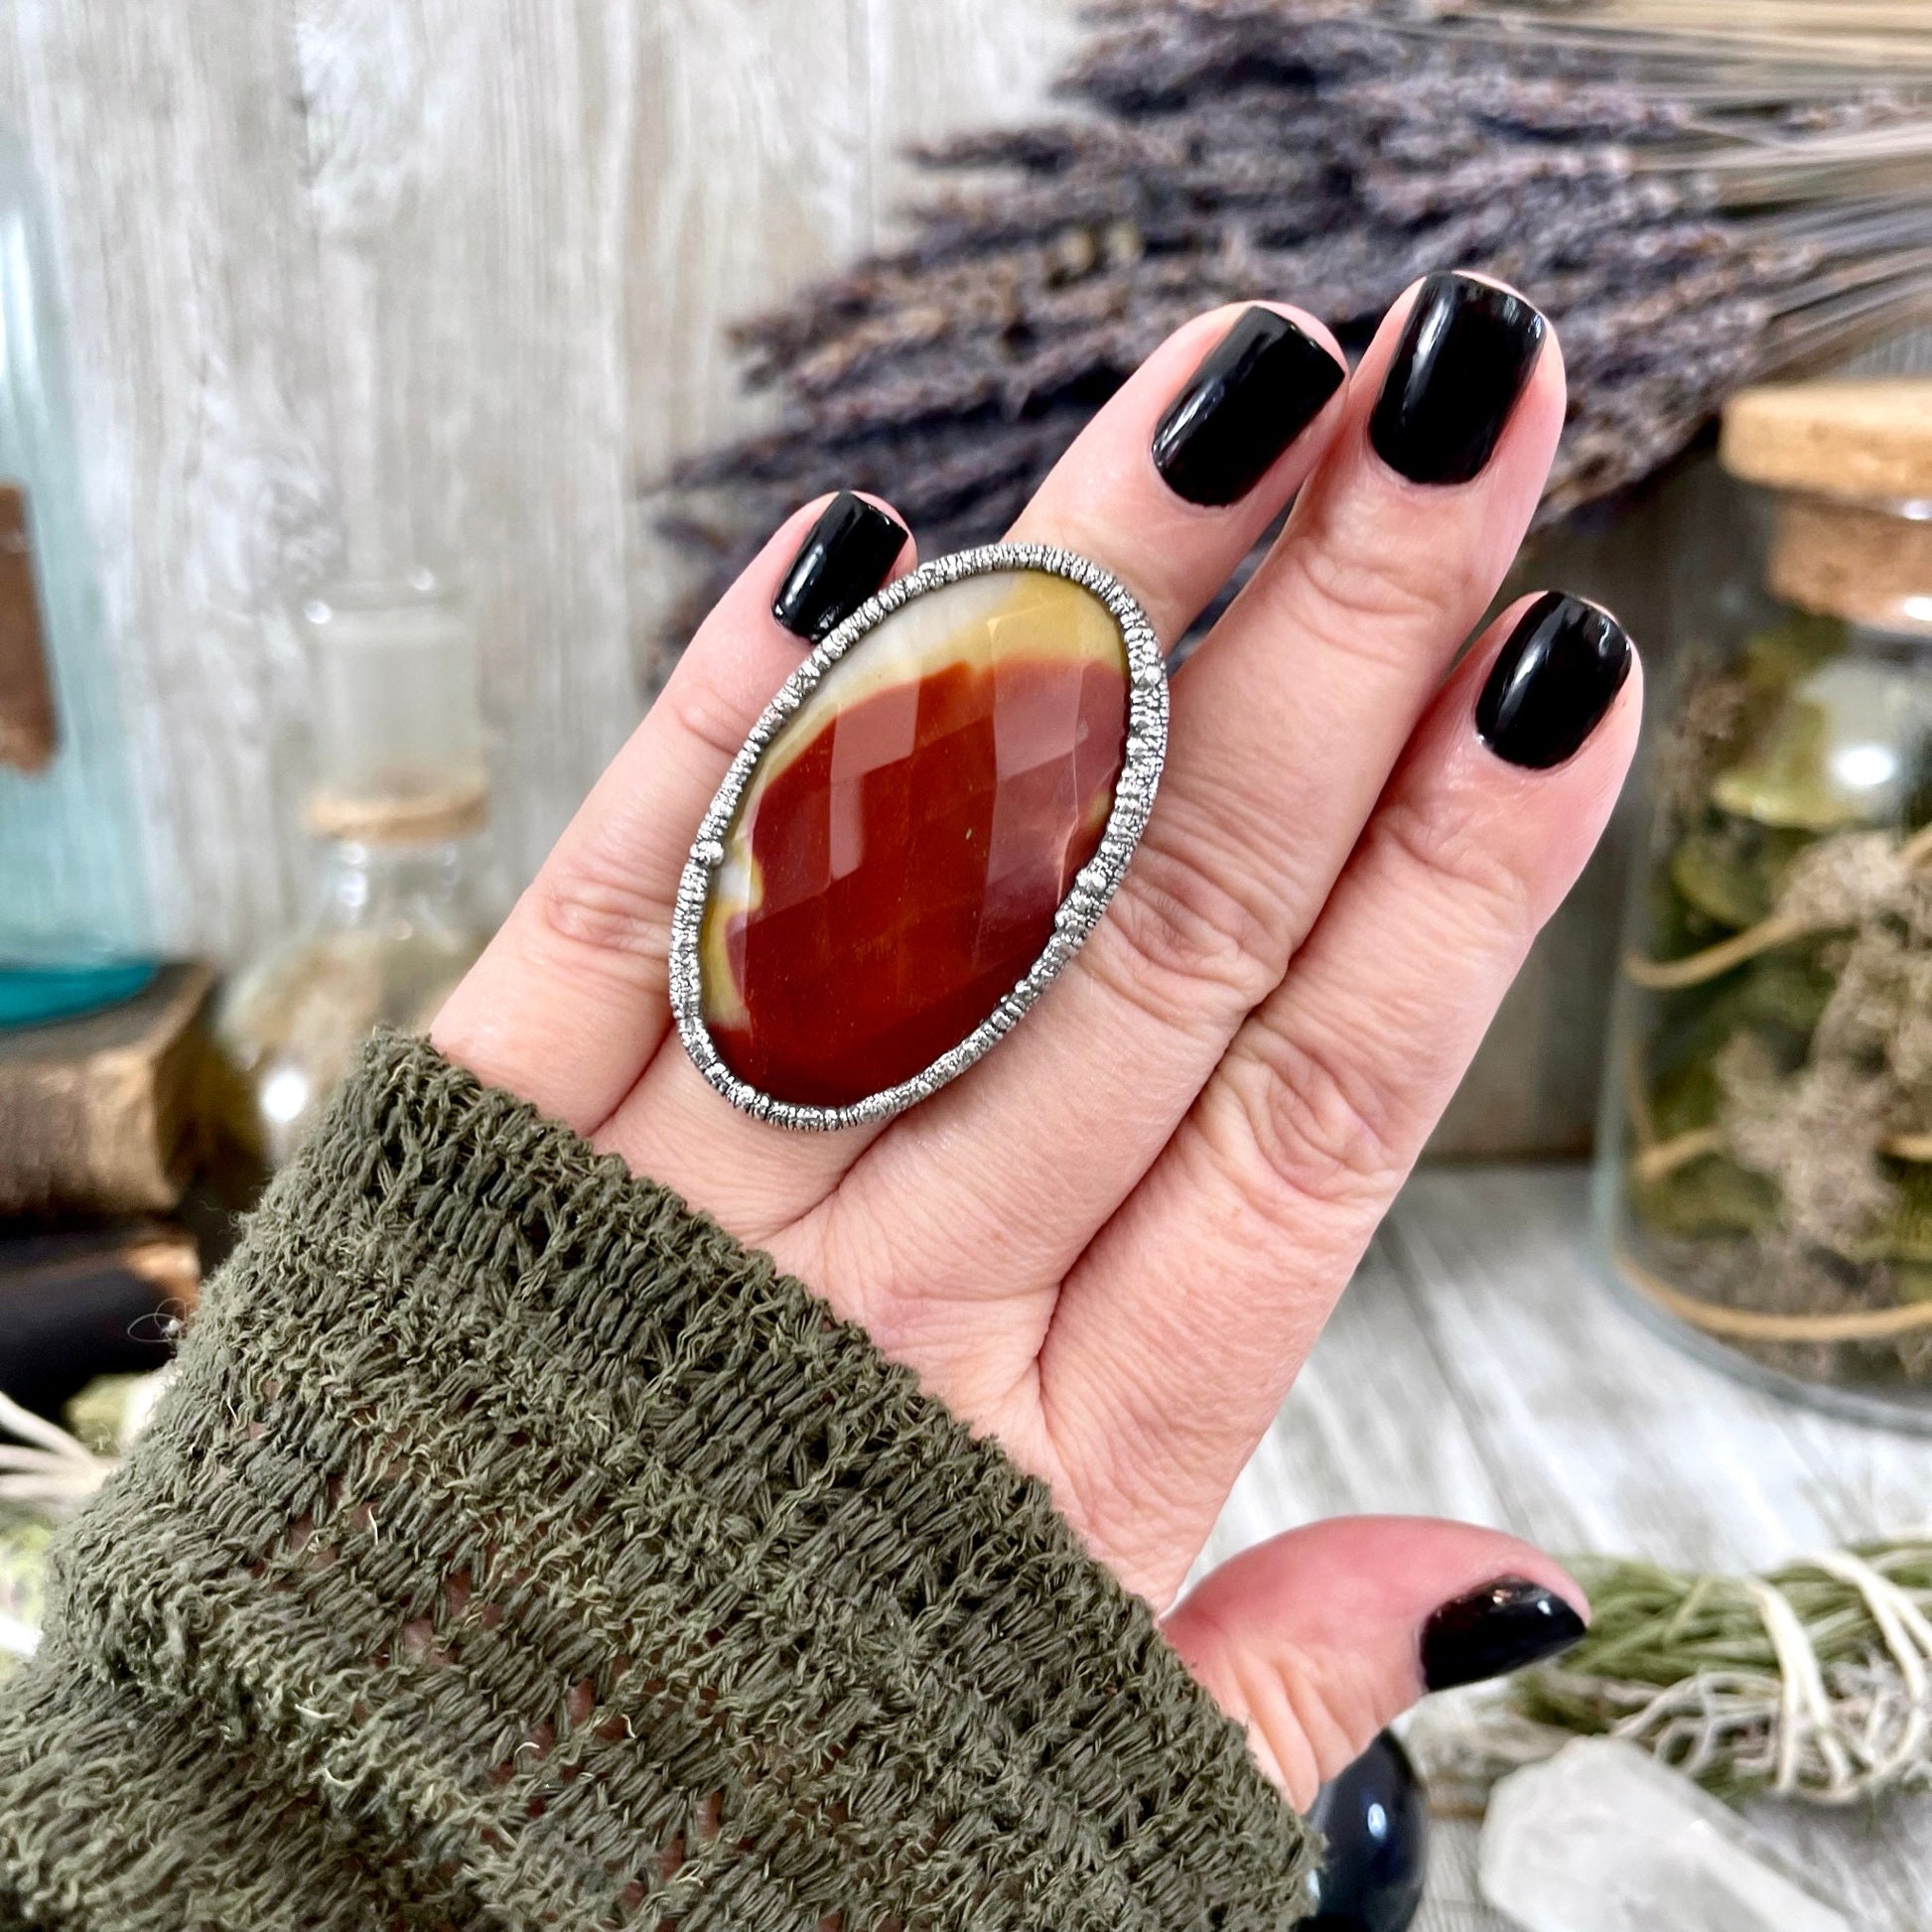 Big Bold Jewelry, Big Silver Ring, Bohemian Jewelry, Etsy ID: 1531387219, Foxlark Alchemy, FOXLARK- RINGS, Jewelry, large Stone Ring, Mookaite Ring, Red Stone Ring, Ring for Woman, Ring in Silver, Rings, Silver crystal ring, Silver stone ring, Statement J